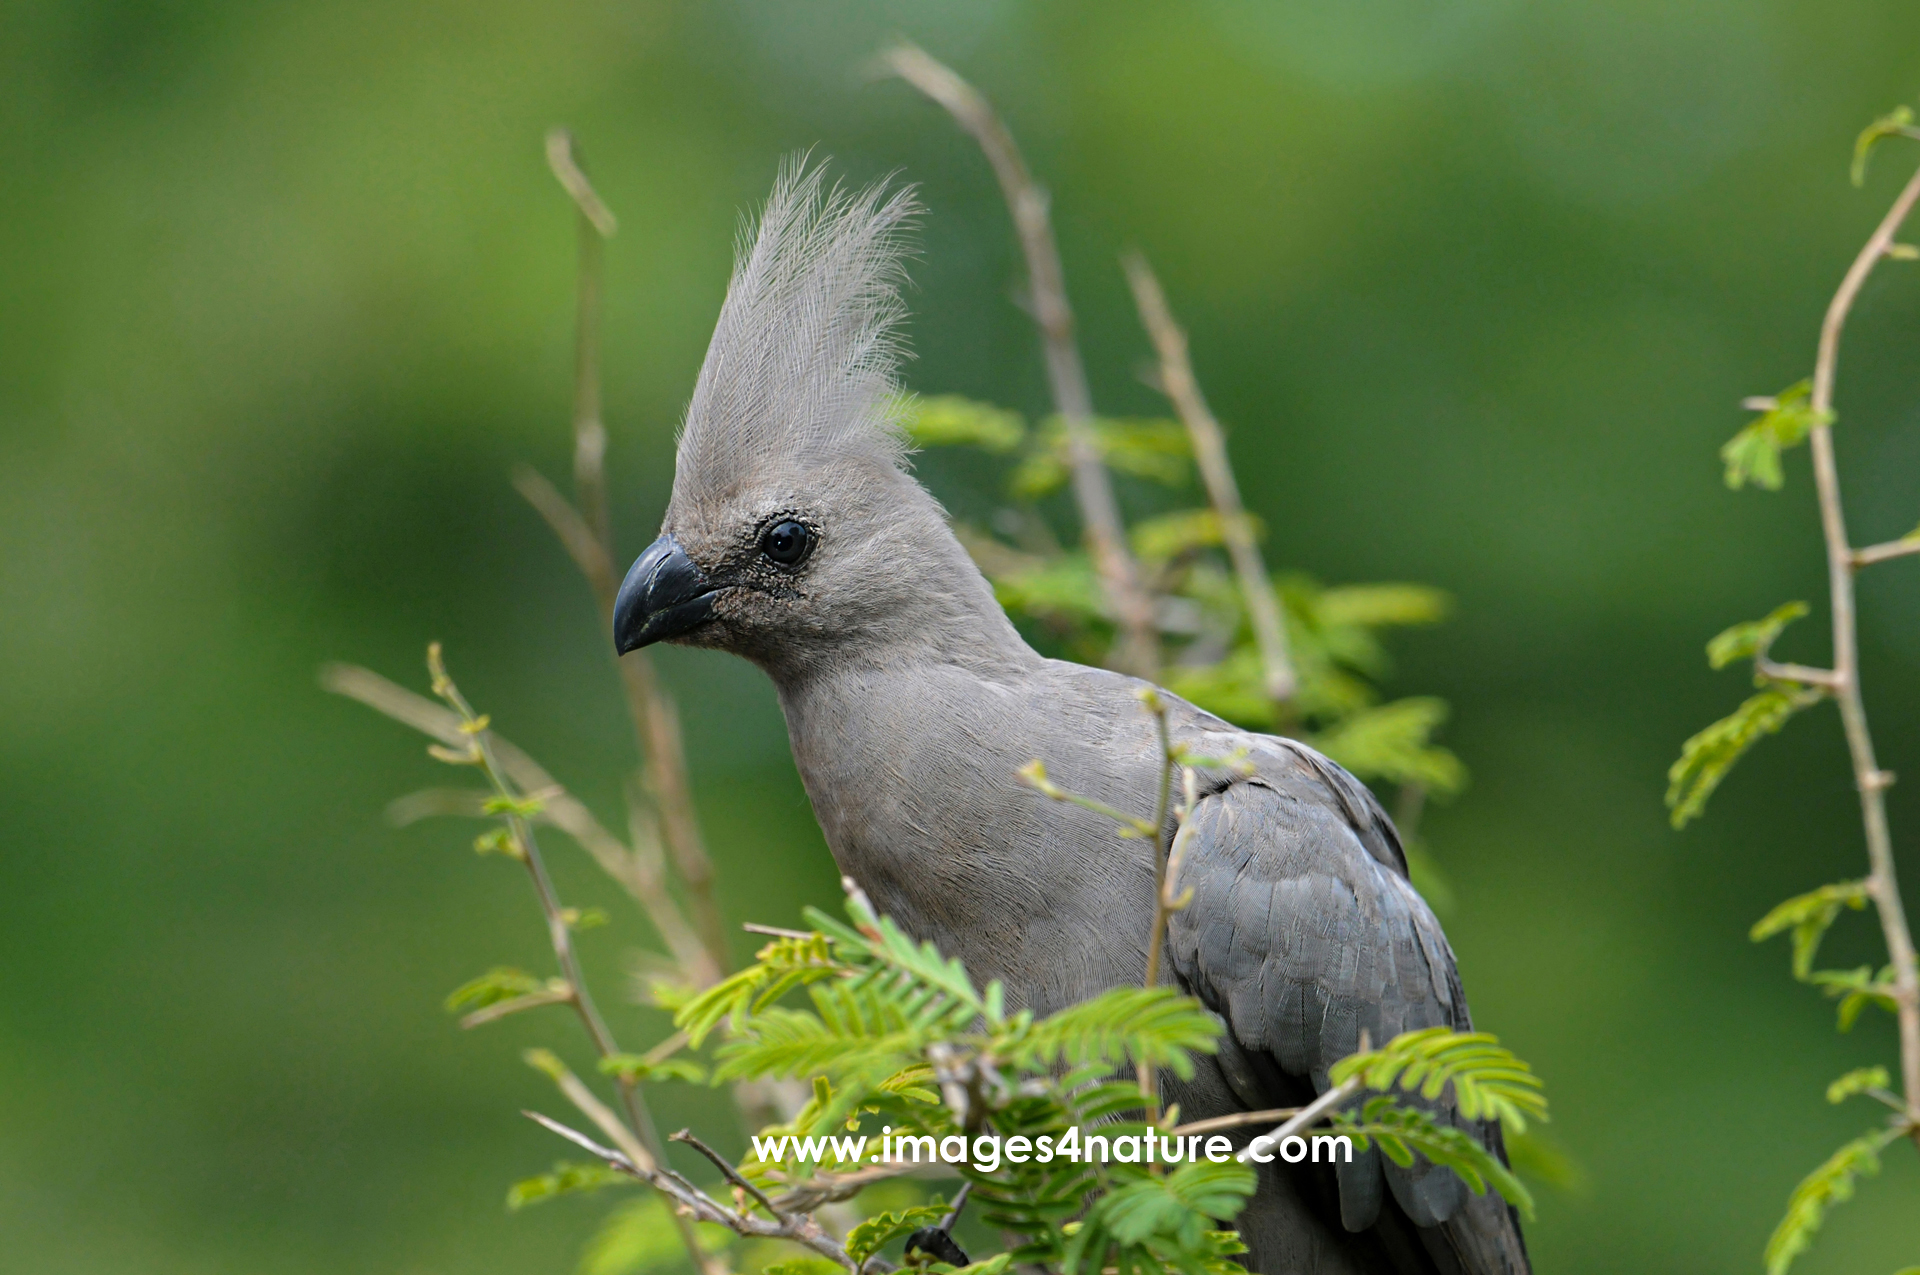 Side view portrait of a grey lourie bird with feather crown